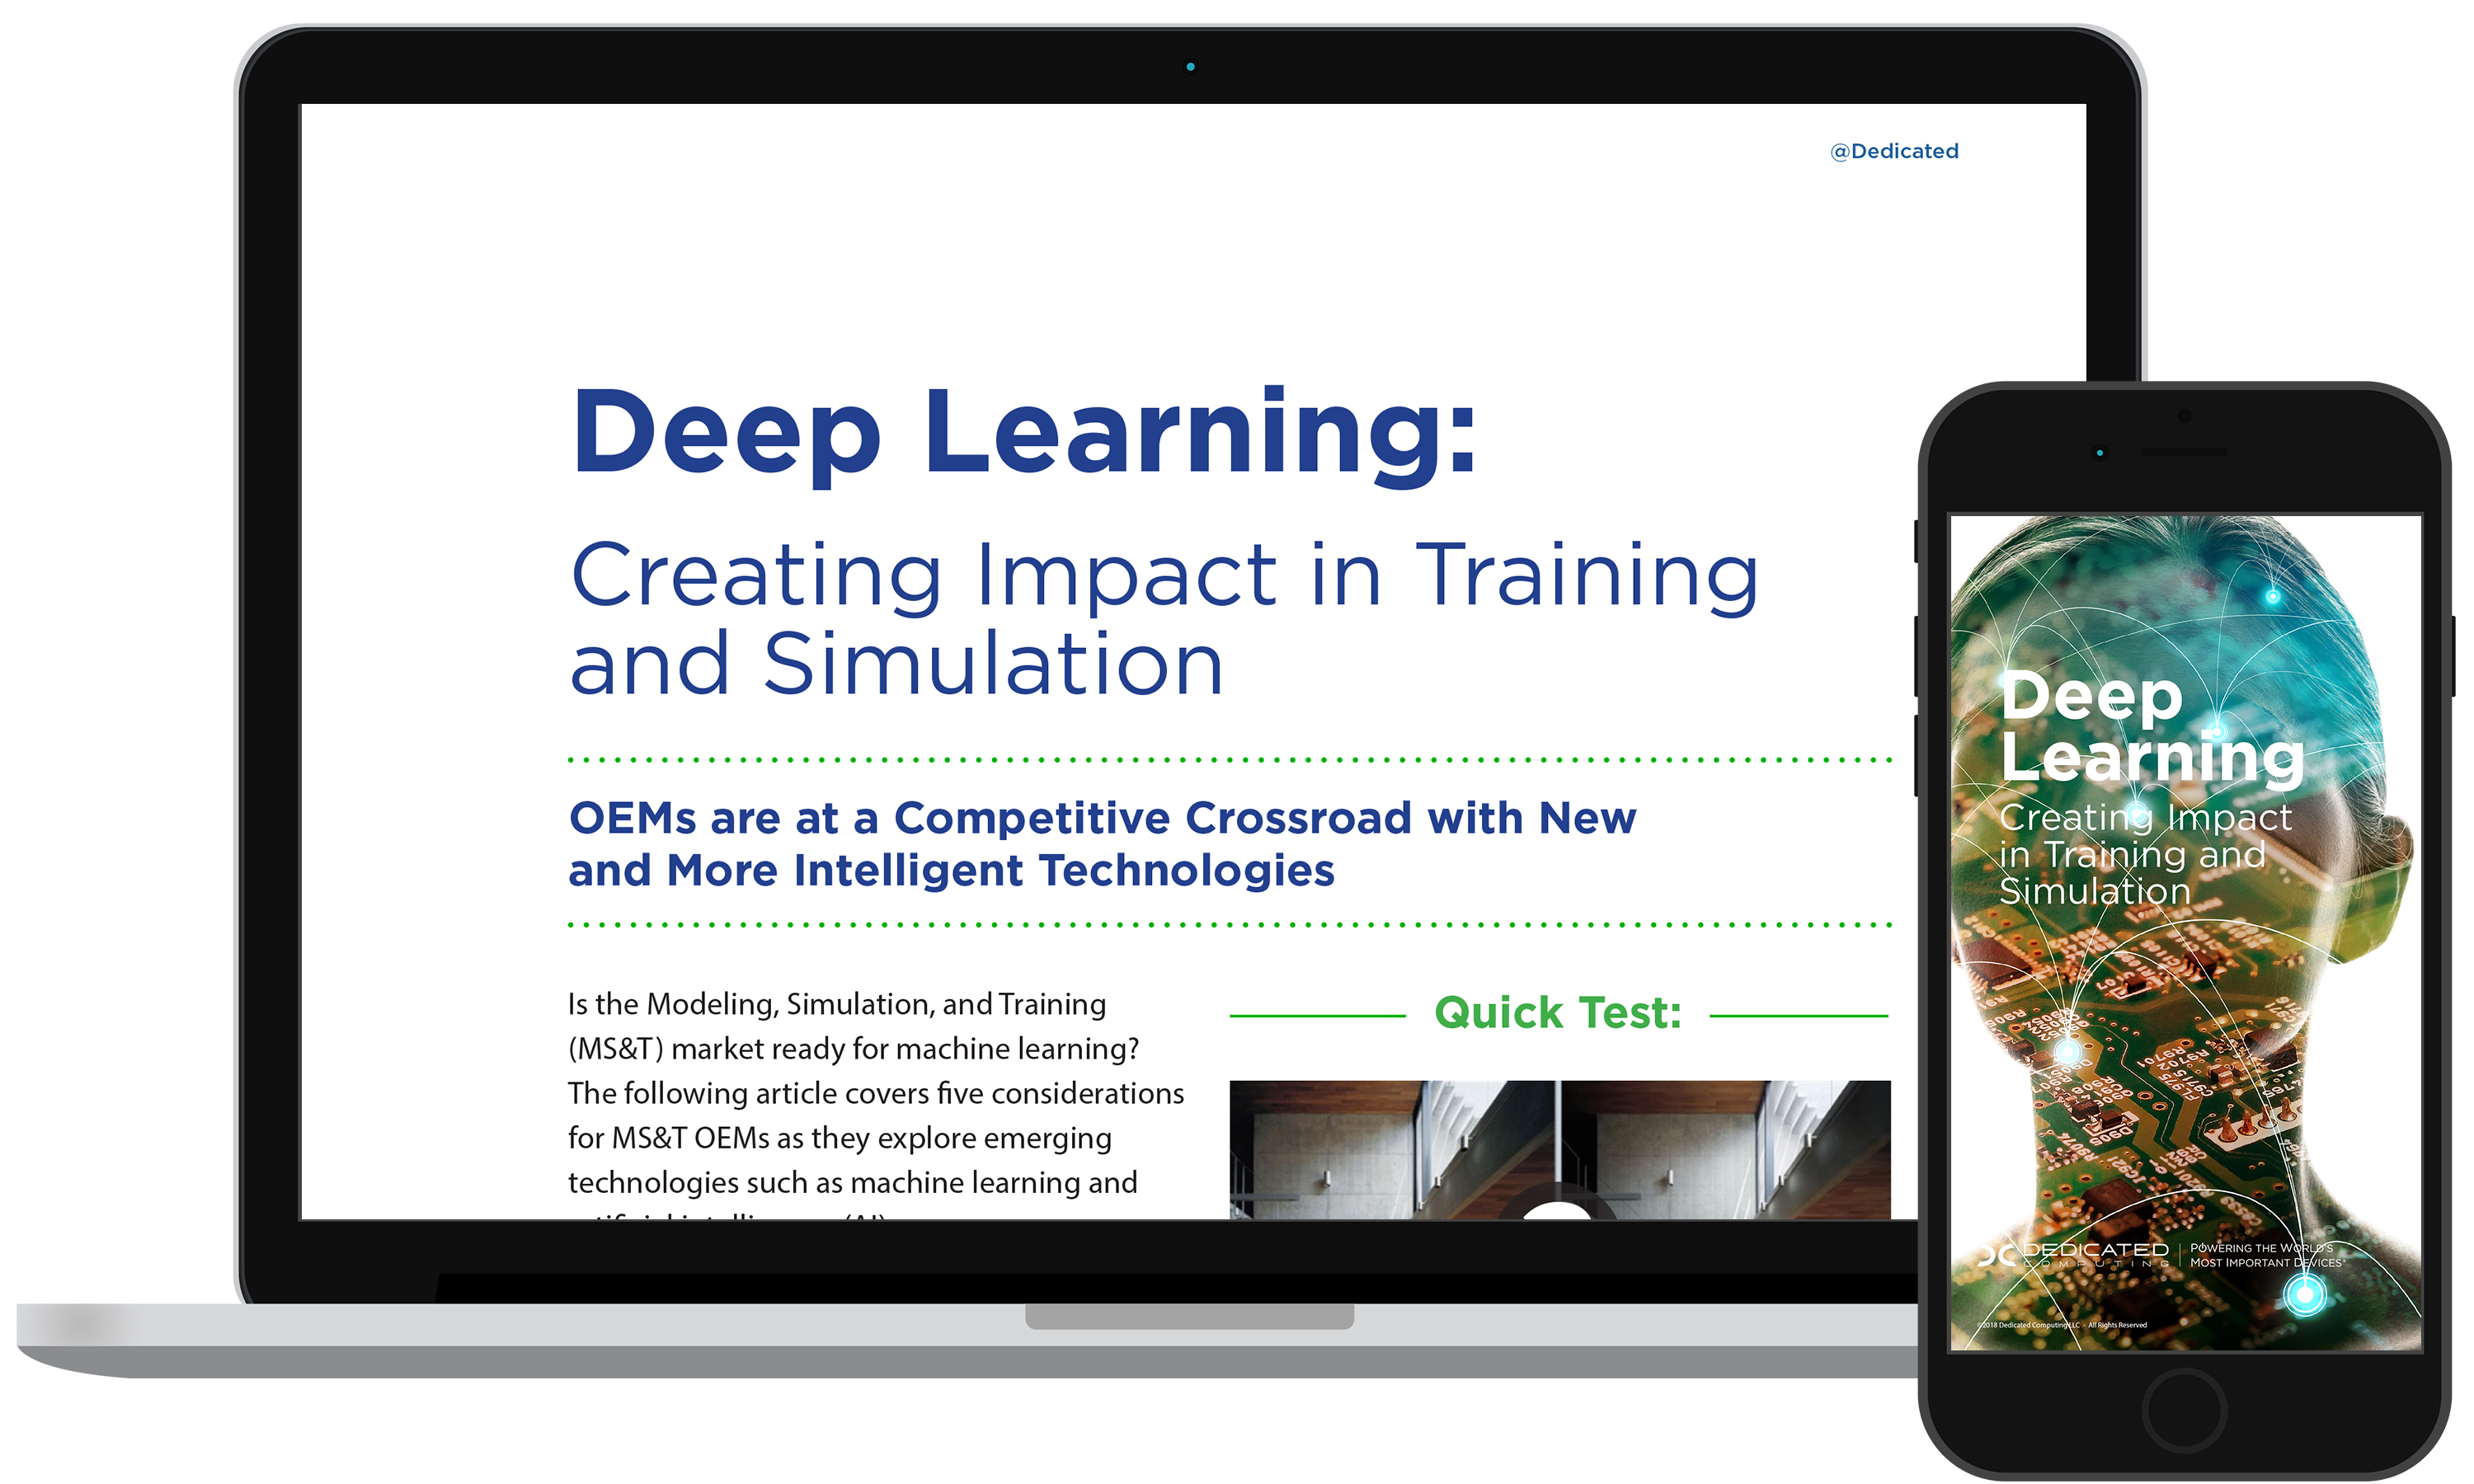 Is the Training & Simulation Market Ready for Machine Learning?